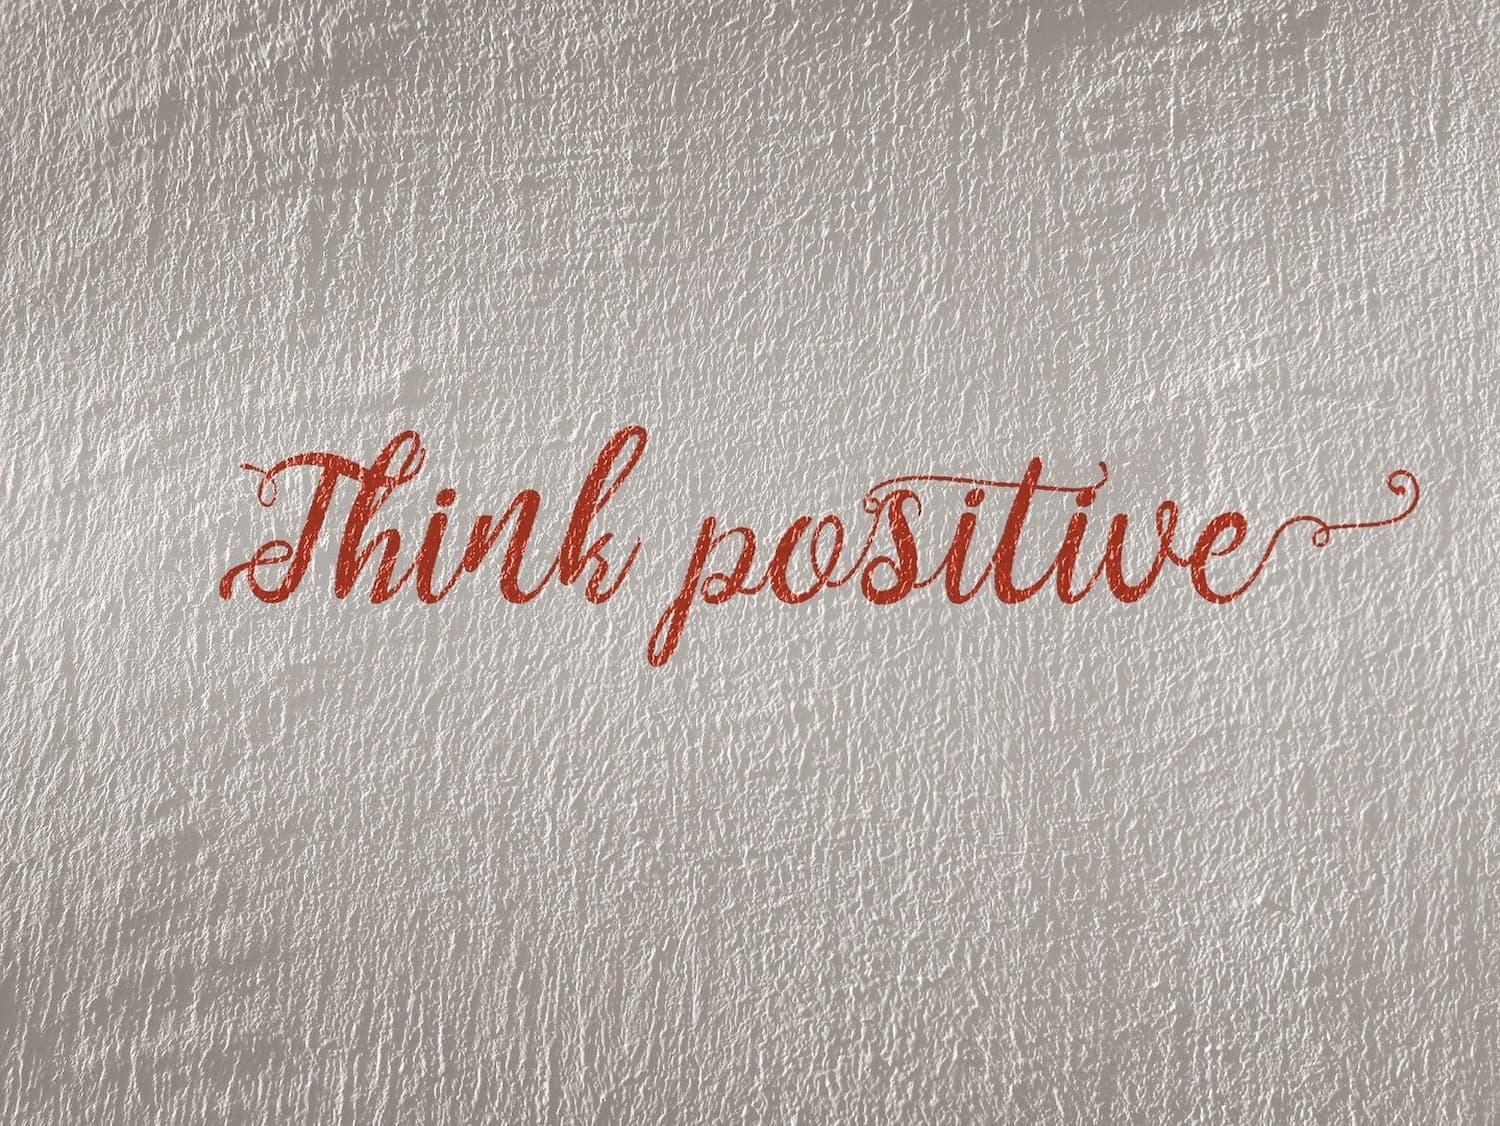 Positive Thinking For Health